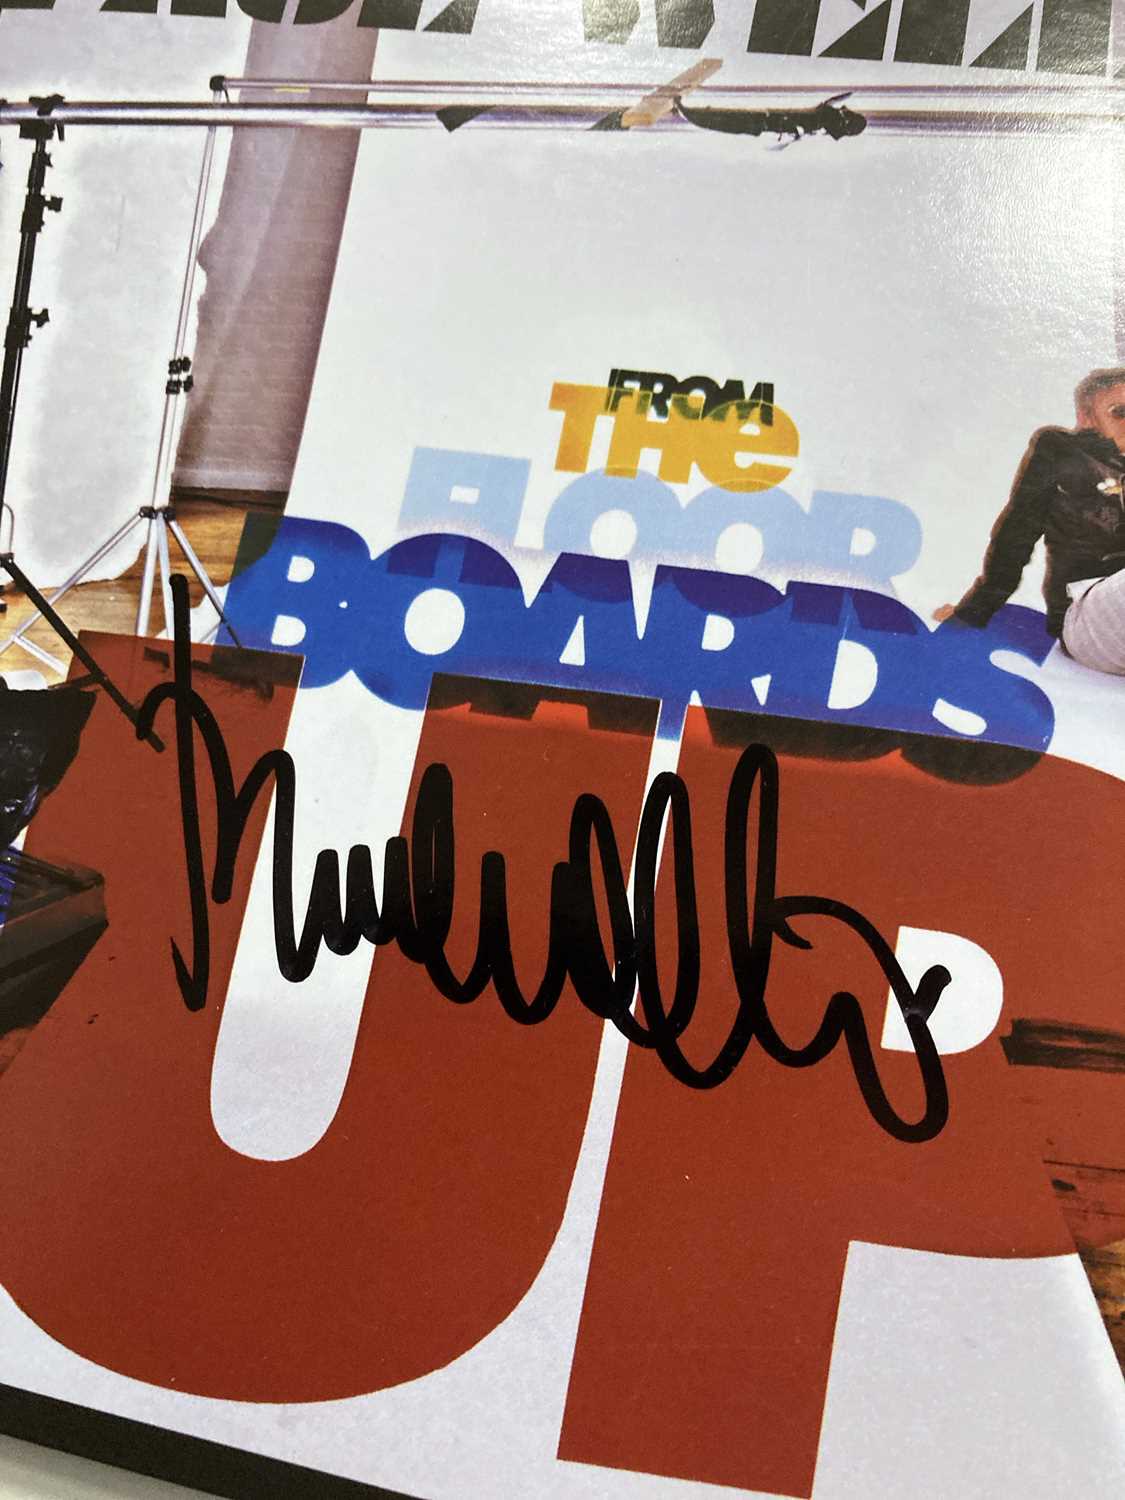 PAUL WELLER SIGNED ITEMS. - Image 2 of 6